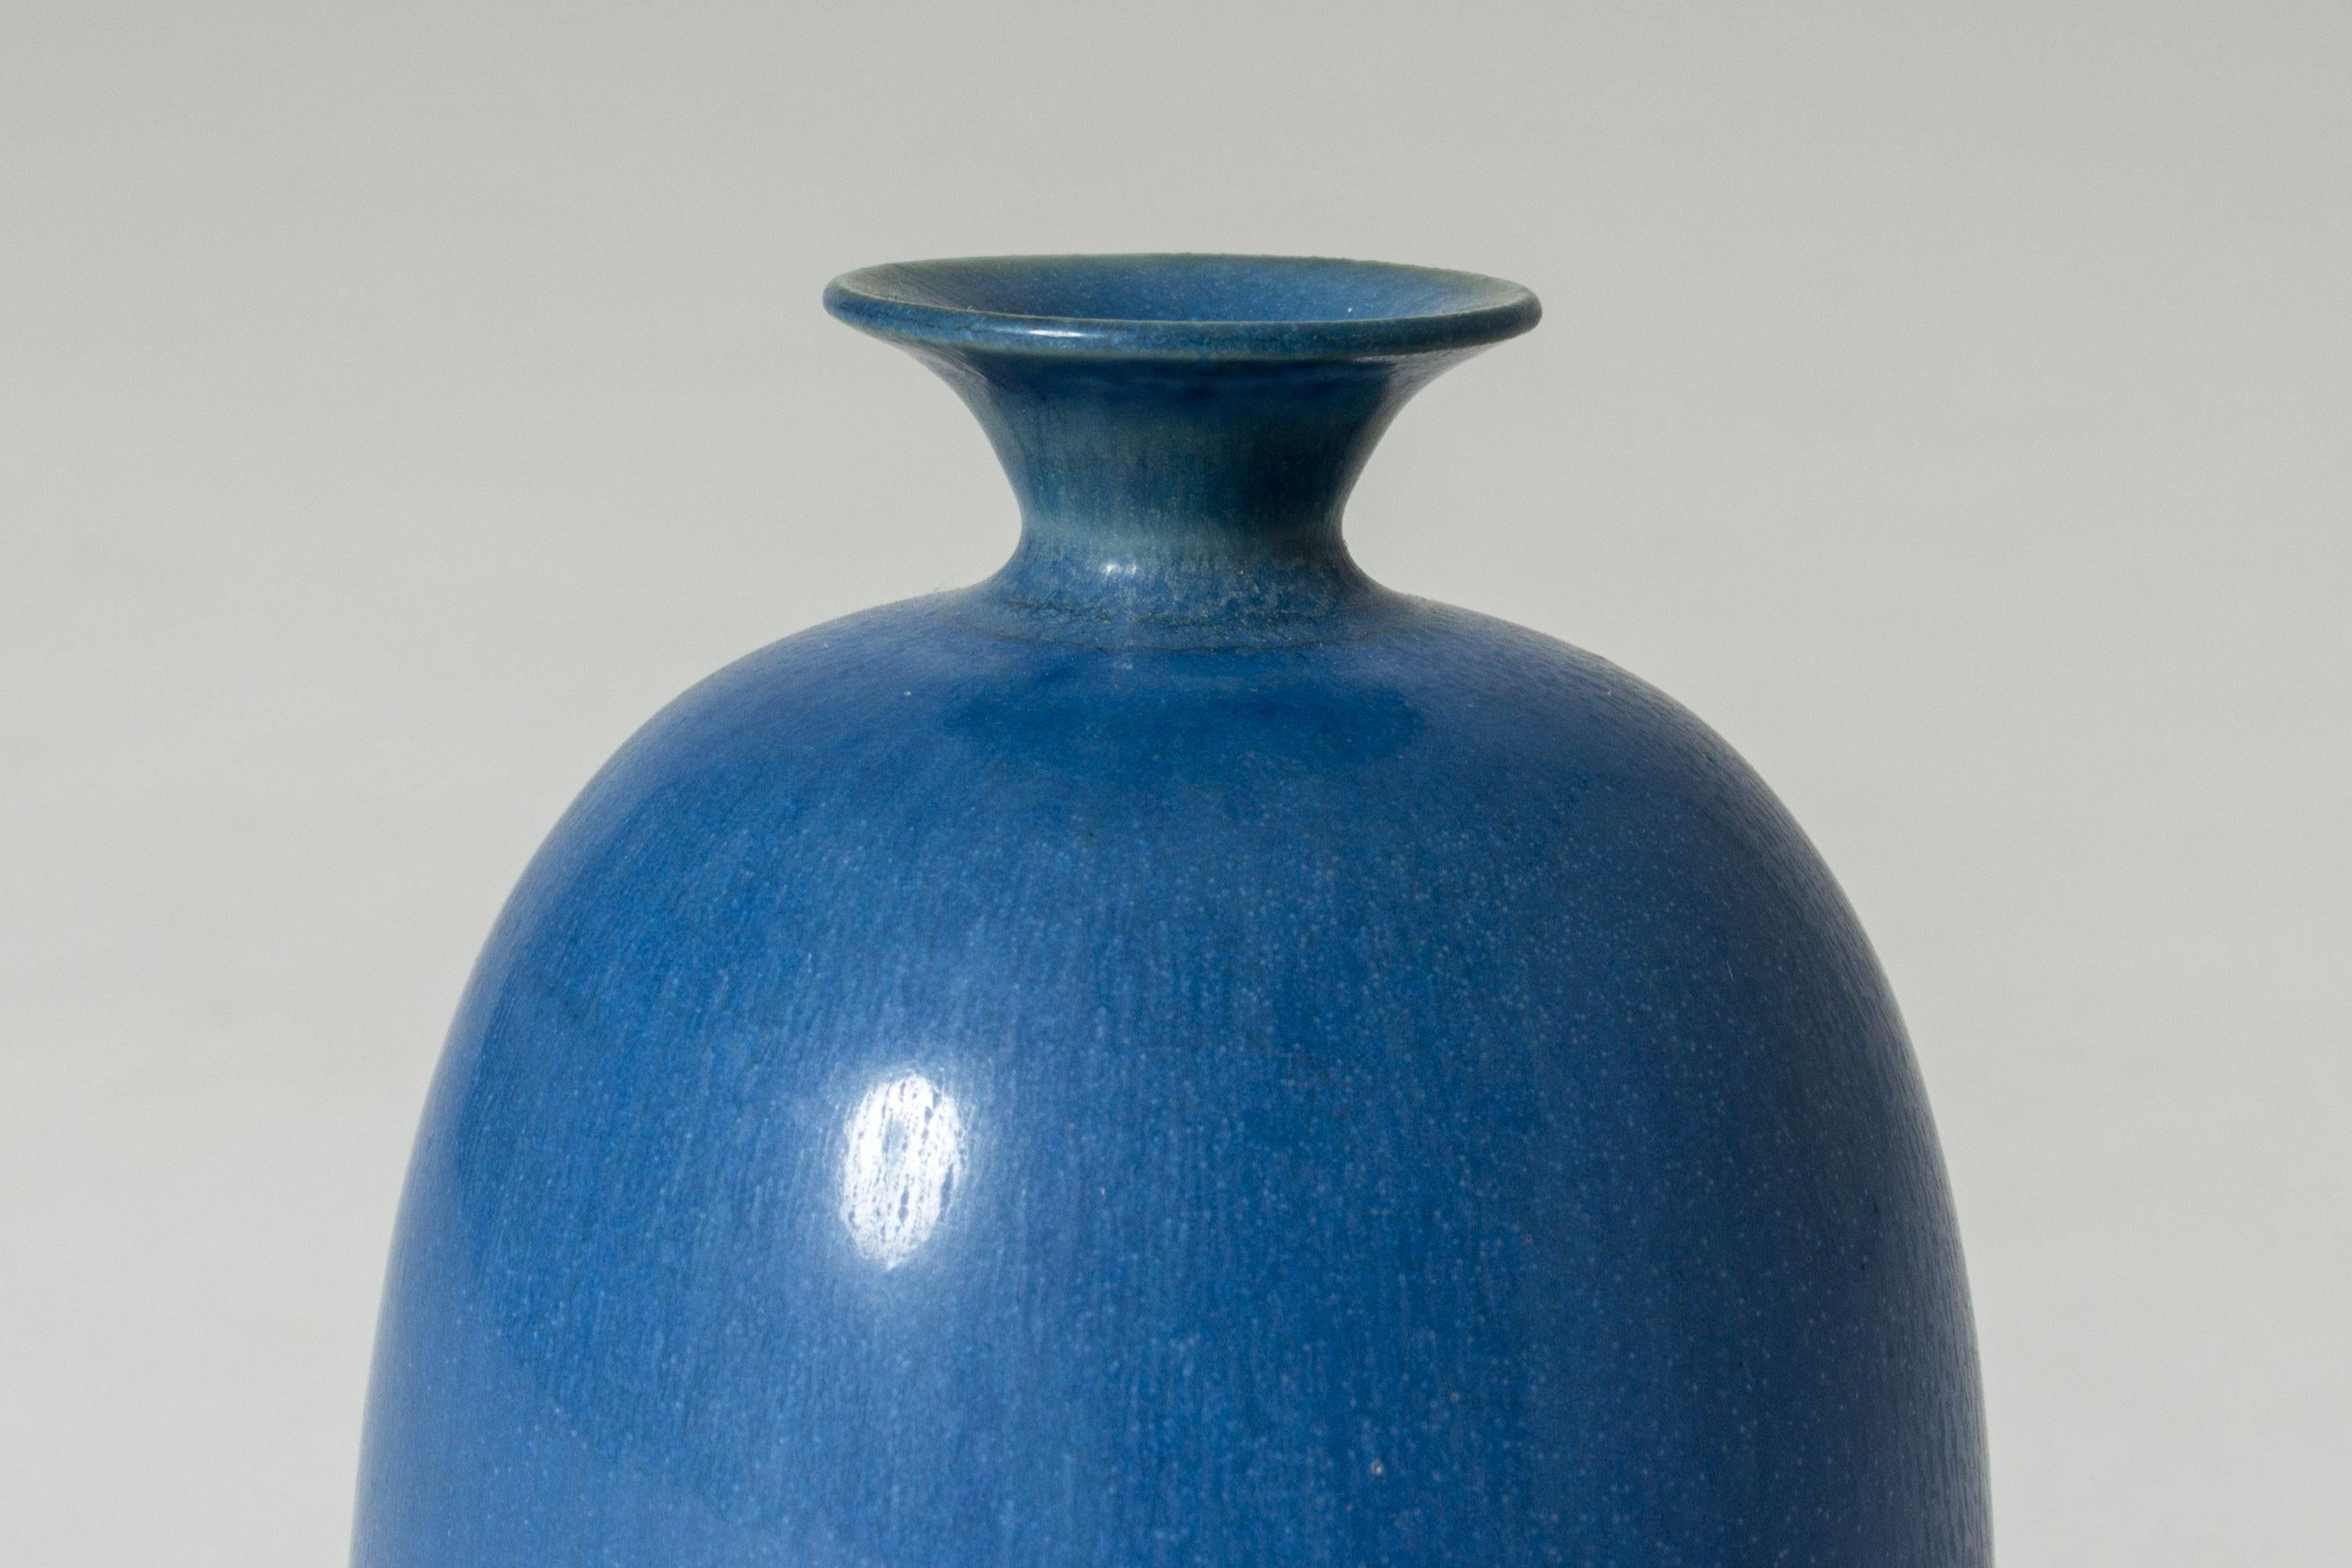 Lovely small stoneware vase by Berndt Friberg, in a buckthorn form with a small widening neck. Clear blue hare’s fur glaze.

Berndt Friberg was a Swedish ceramicist, renowned for his stoneware vases and vessels for Gustavsberg. His pure, composed